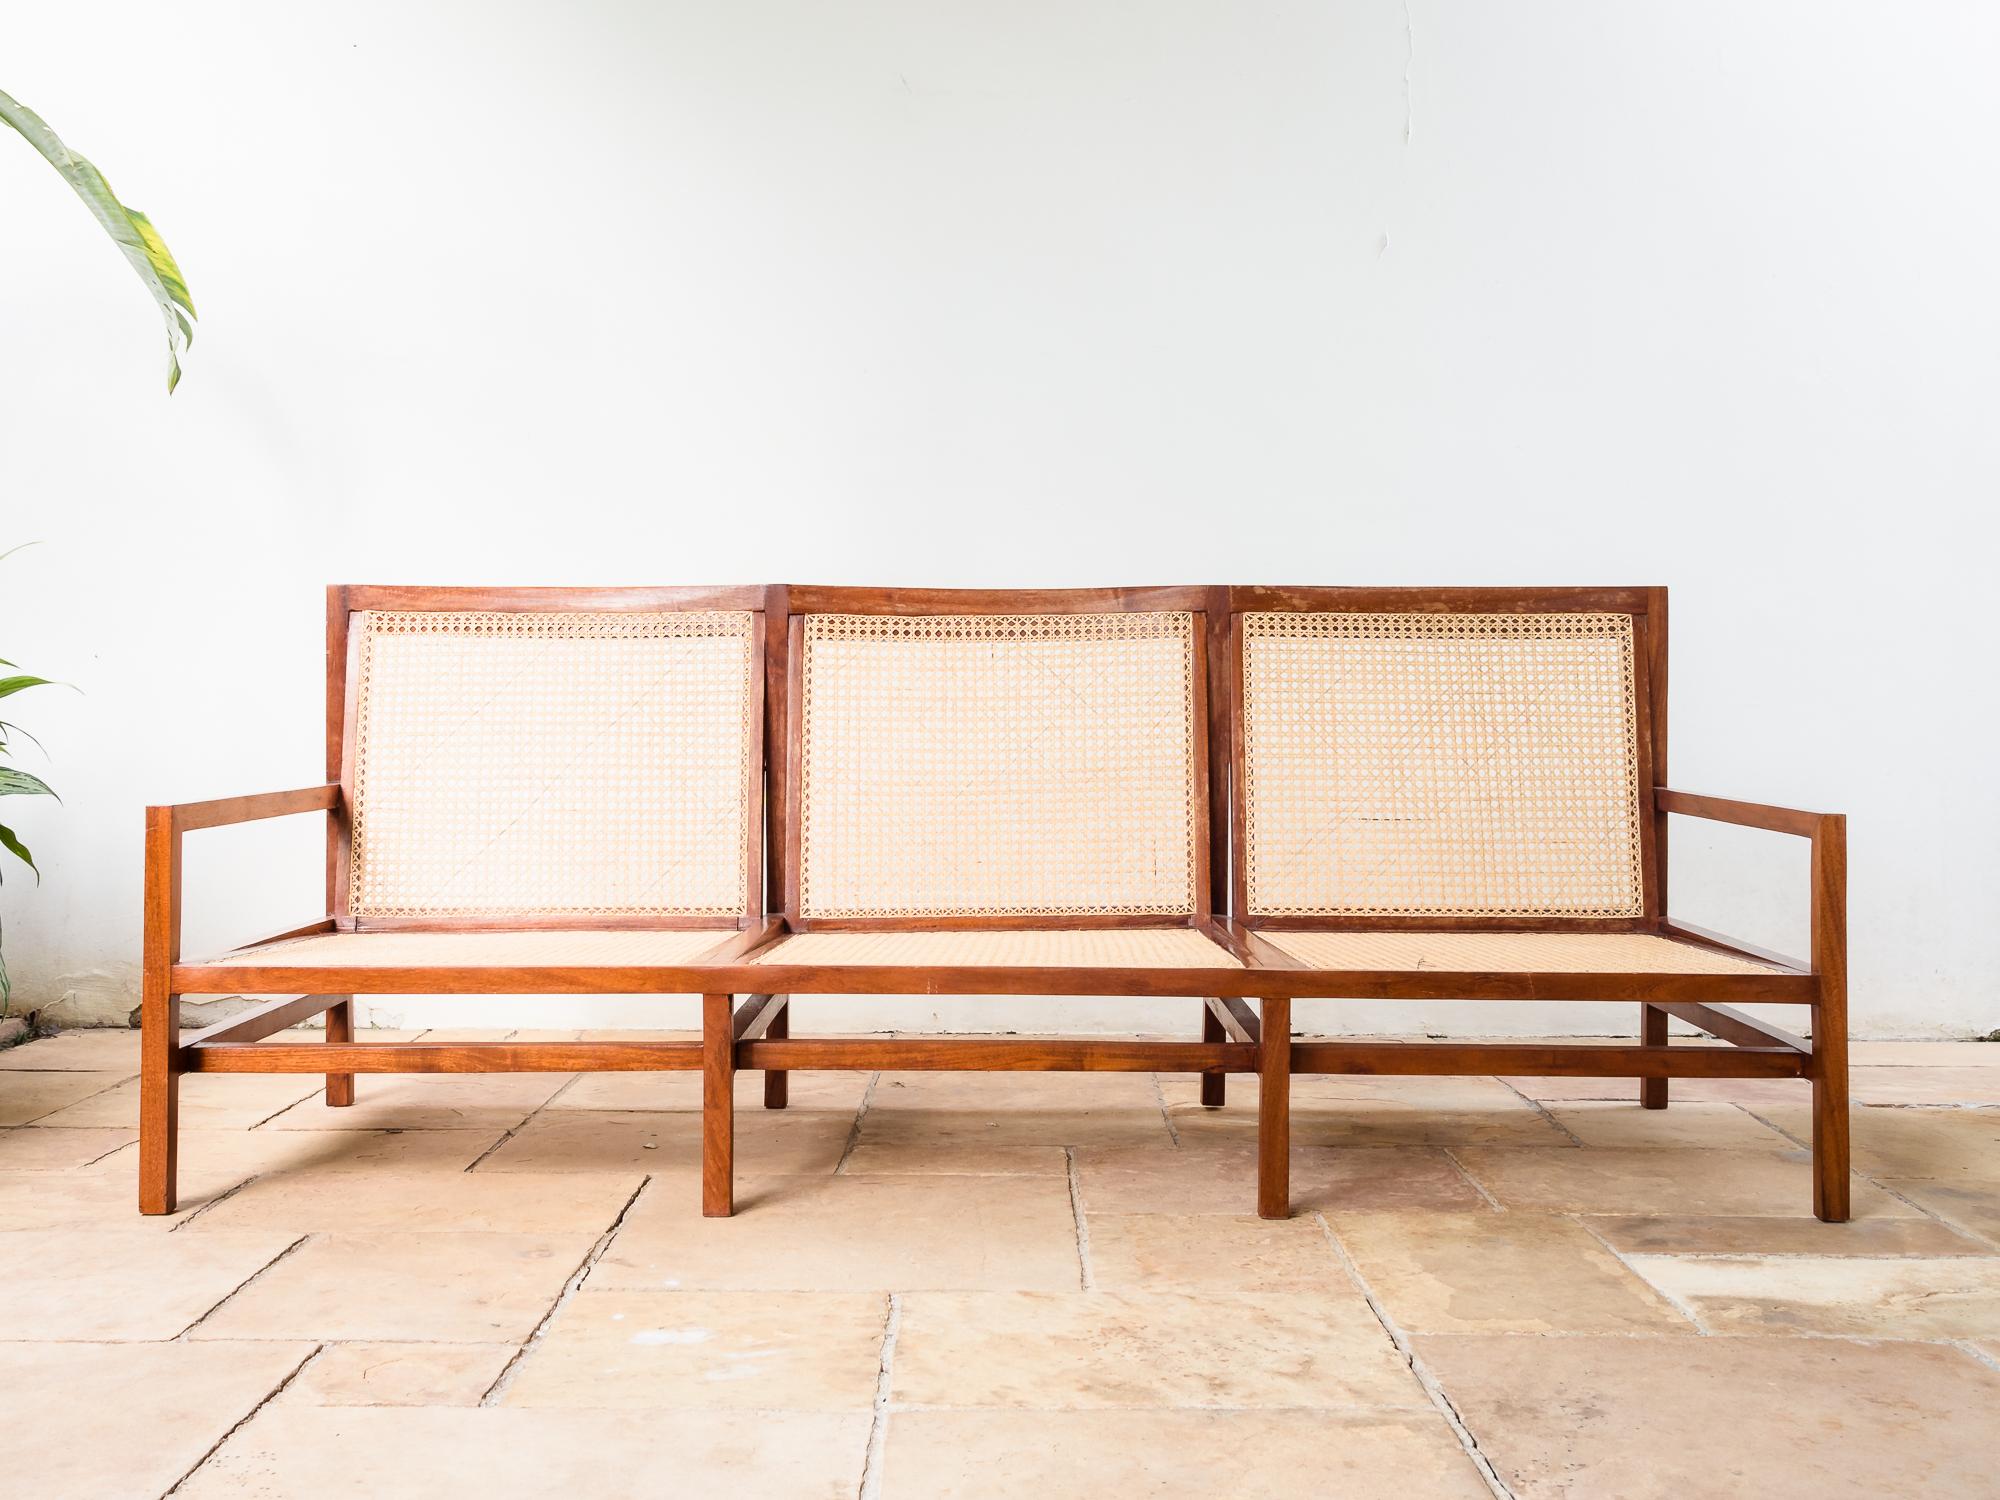 Brazilian Mid-Century Modern Cane and Peroba Branca Hardwood Three Seat Sofa designed and produced by Joaquim Tenreiro, early 1960s.
This three seat sofa is amongst the most minimal and well executed by Joaquim Tenreiro, with extremely subtle